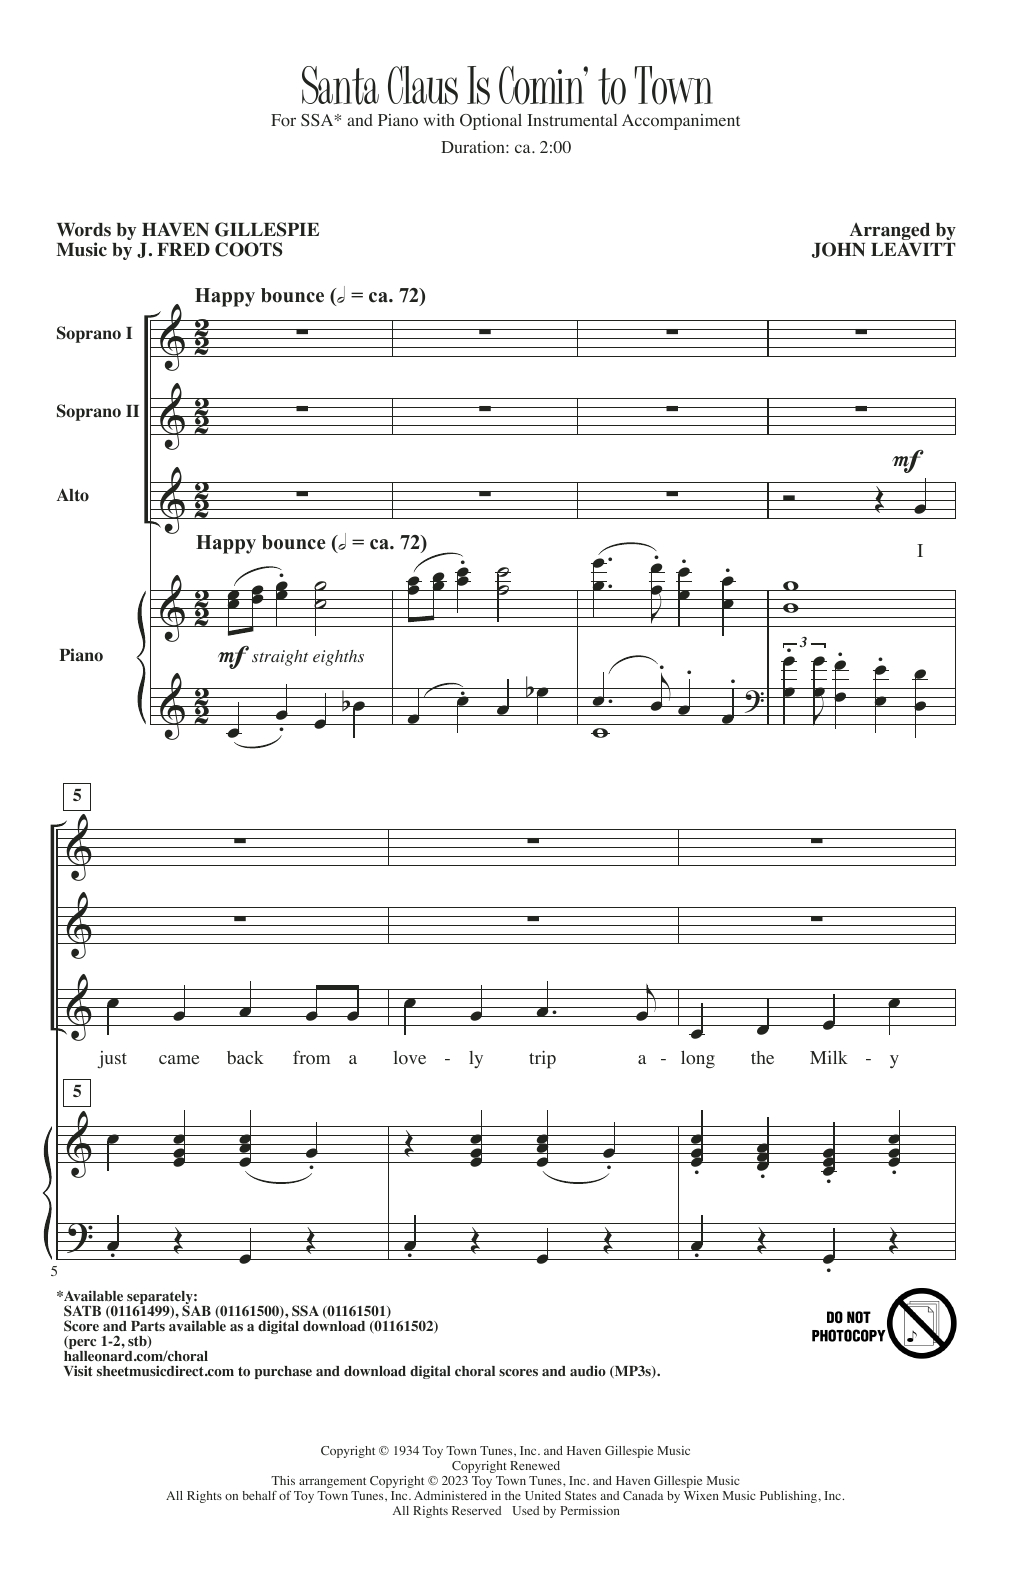 Download J. Fred Coots Santa Claus Is Comin' To Town (arr. Joh Sheet Music